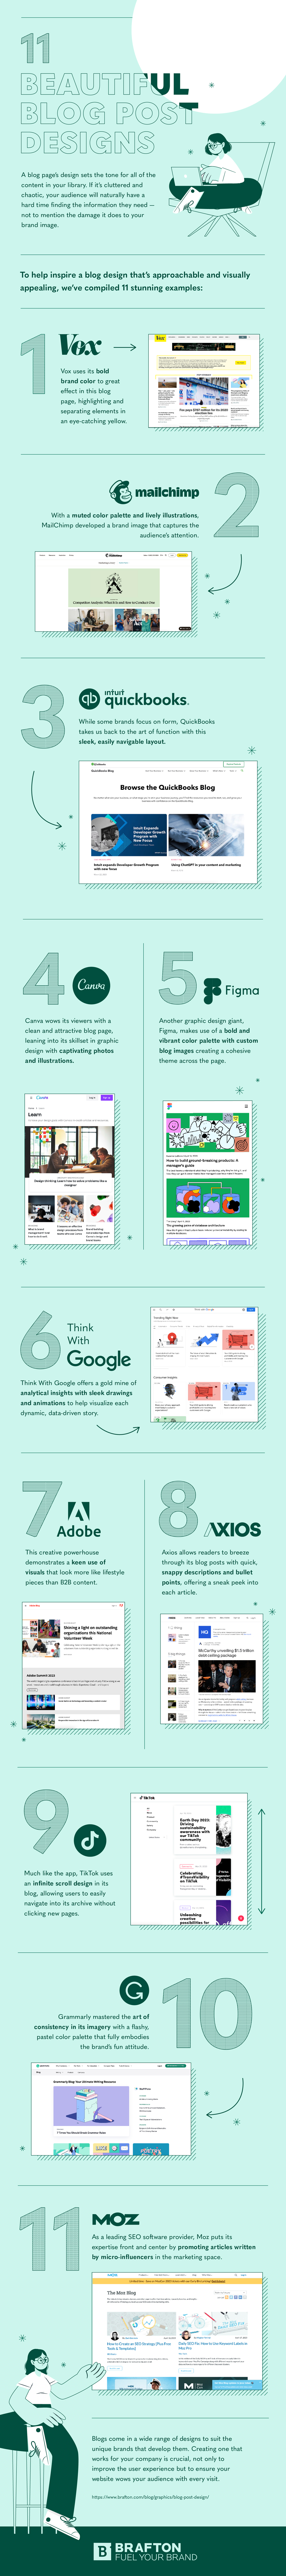 Examples of Beautiful Blog Post Design infographic